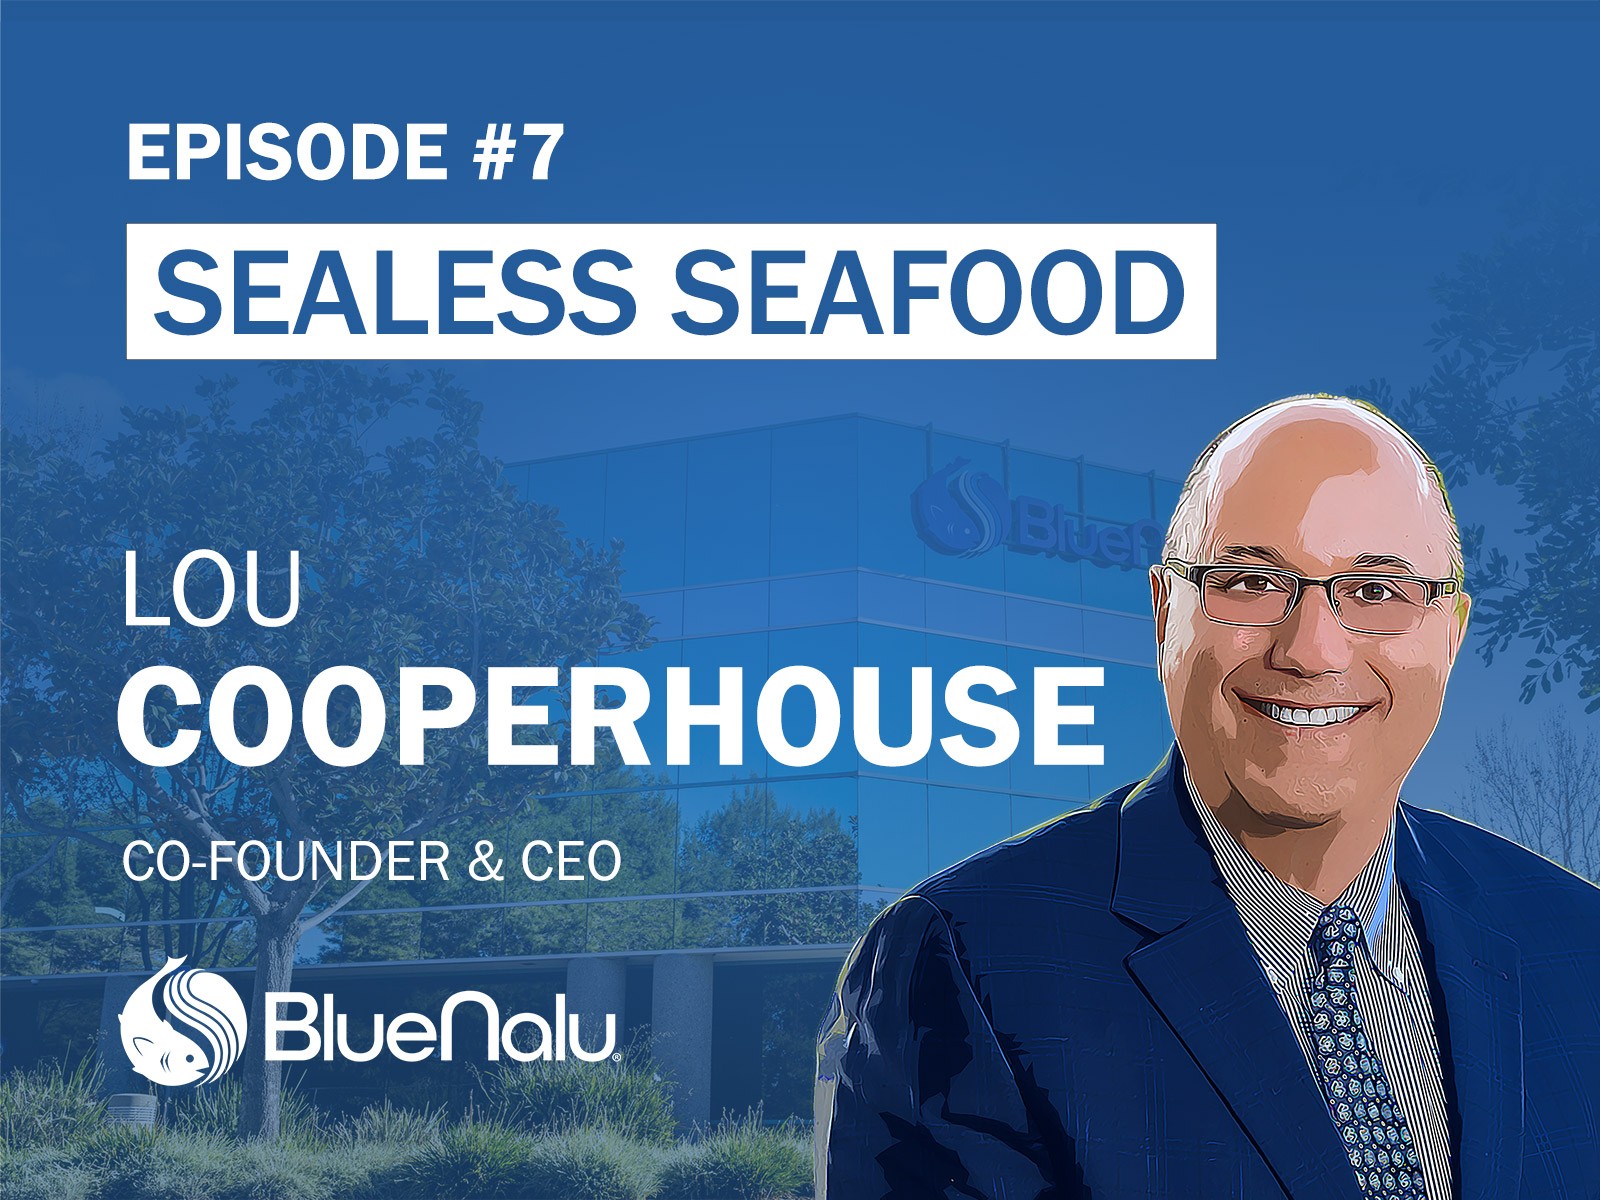 Lou Cooperhouse, the CEO and Co-Founder of BlueNalu, the world’s leading producer of cell-based seafood. With an early interest in microorganisms, Lou set out on an impressive 36-year career in the food industry, including roles at Campbell’s, Conagra, Nestle and startup MenuDirect. After deciding to give back, Lou joined the Rutgers Food Innovation Center, where he helped more than 1,000 entrepreneurs over a 15-year period, including Pat Brown, the founder of Impossible Foods. In 2013, Lou discovered the “Holy Grail” of cell-based food. And thanks to a chance encounter at a speaking engagement a few years later, Lou started BlueNalu in 2017. After attracting some of the smartest investors in food-tech, BlueNalu has enormous growth plans and the potential to drastically alter the seafood industry as well as our entire planet.